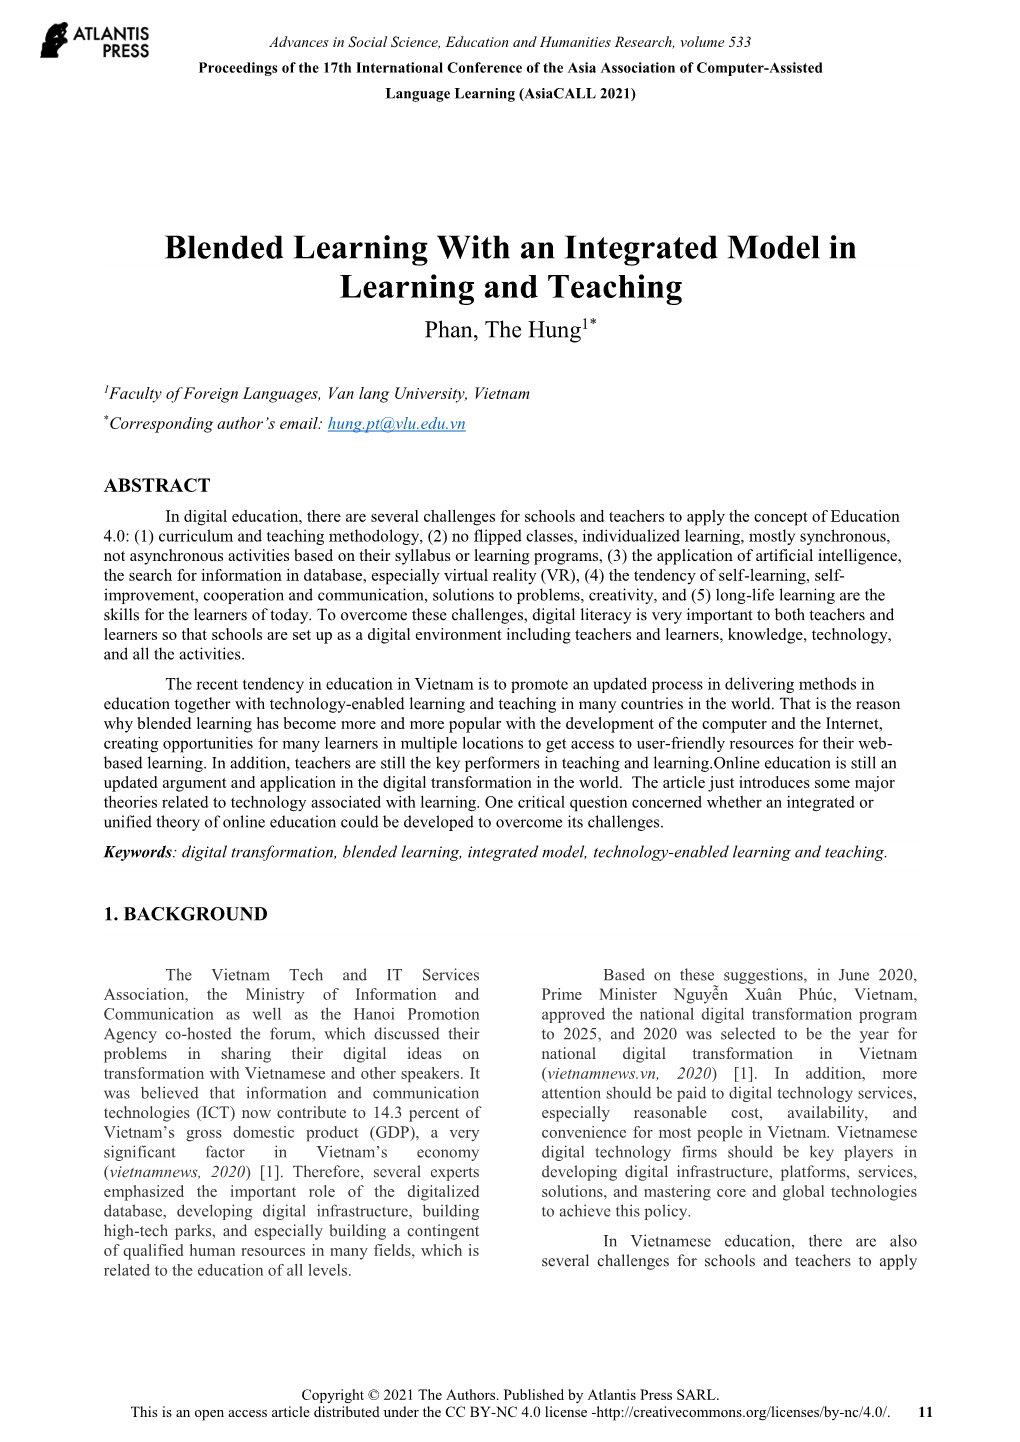 Blended Learning with an Integrated Model in Learning and Teaching Phan, the Hung1*